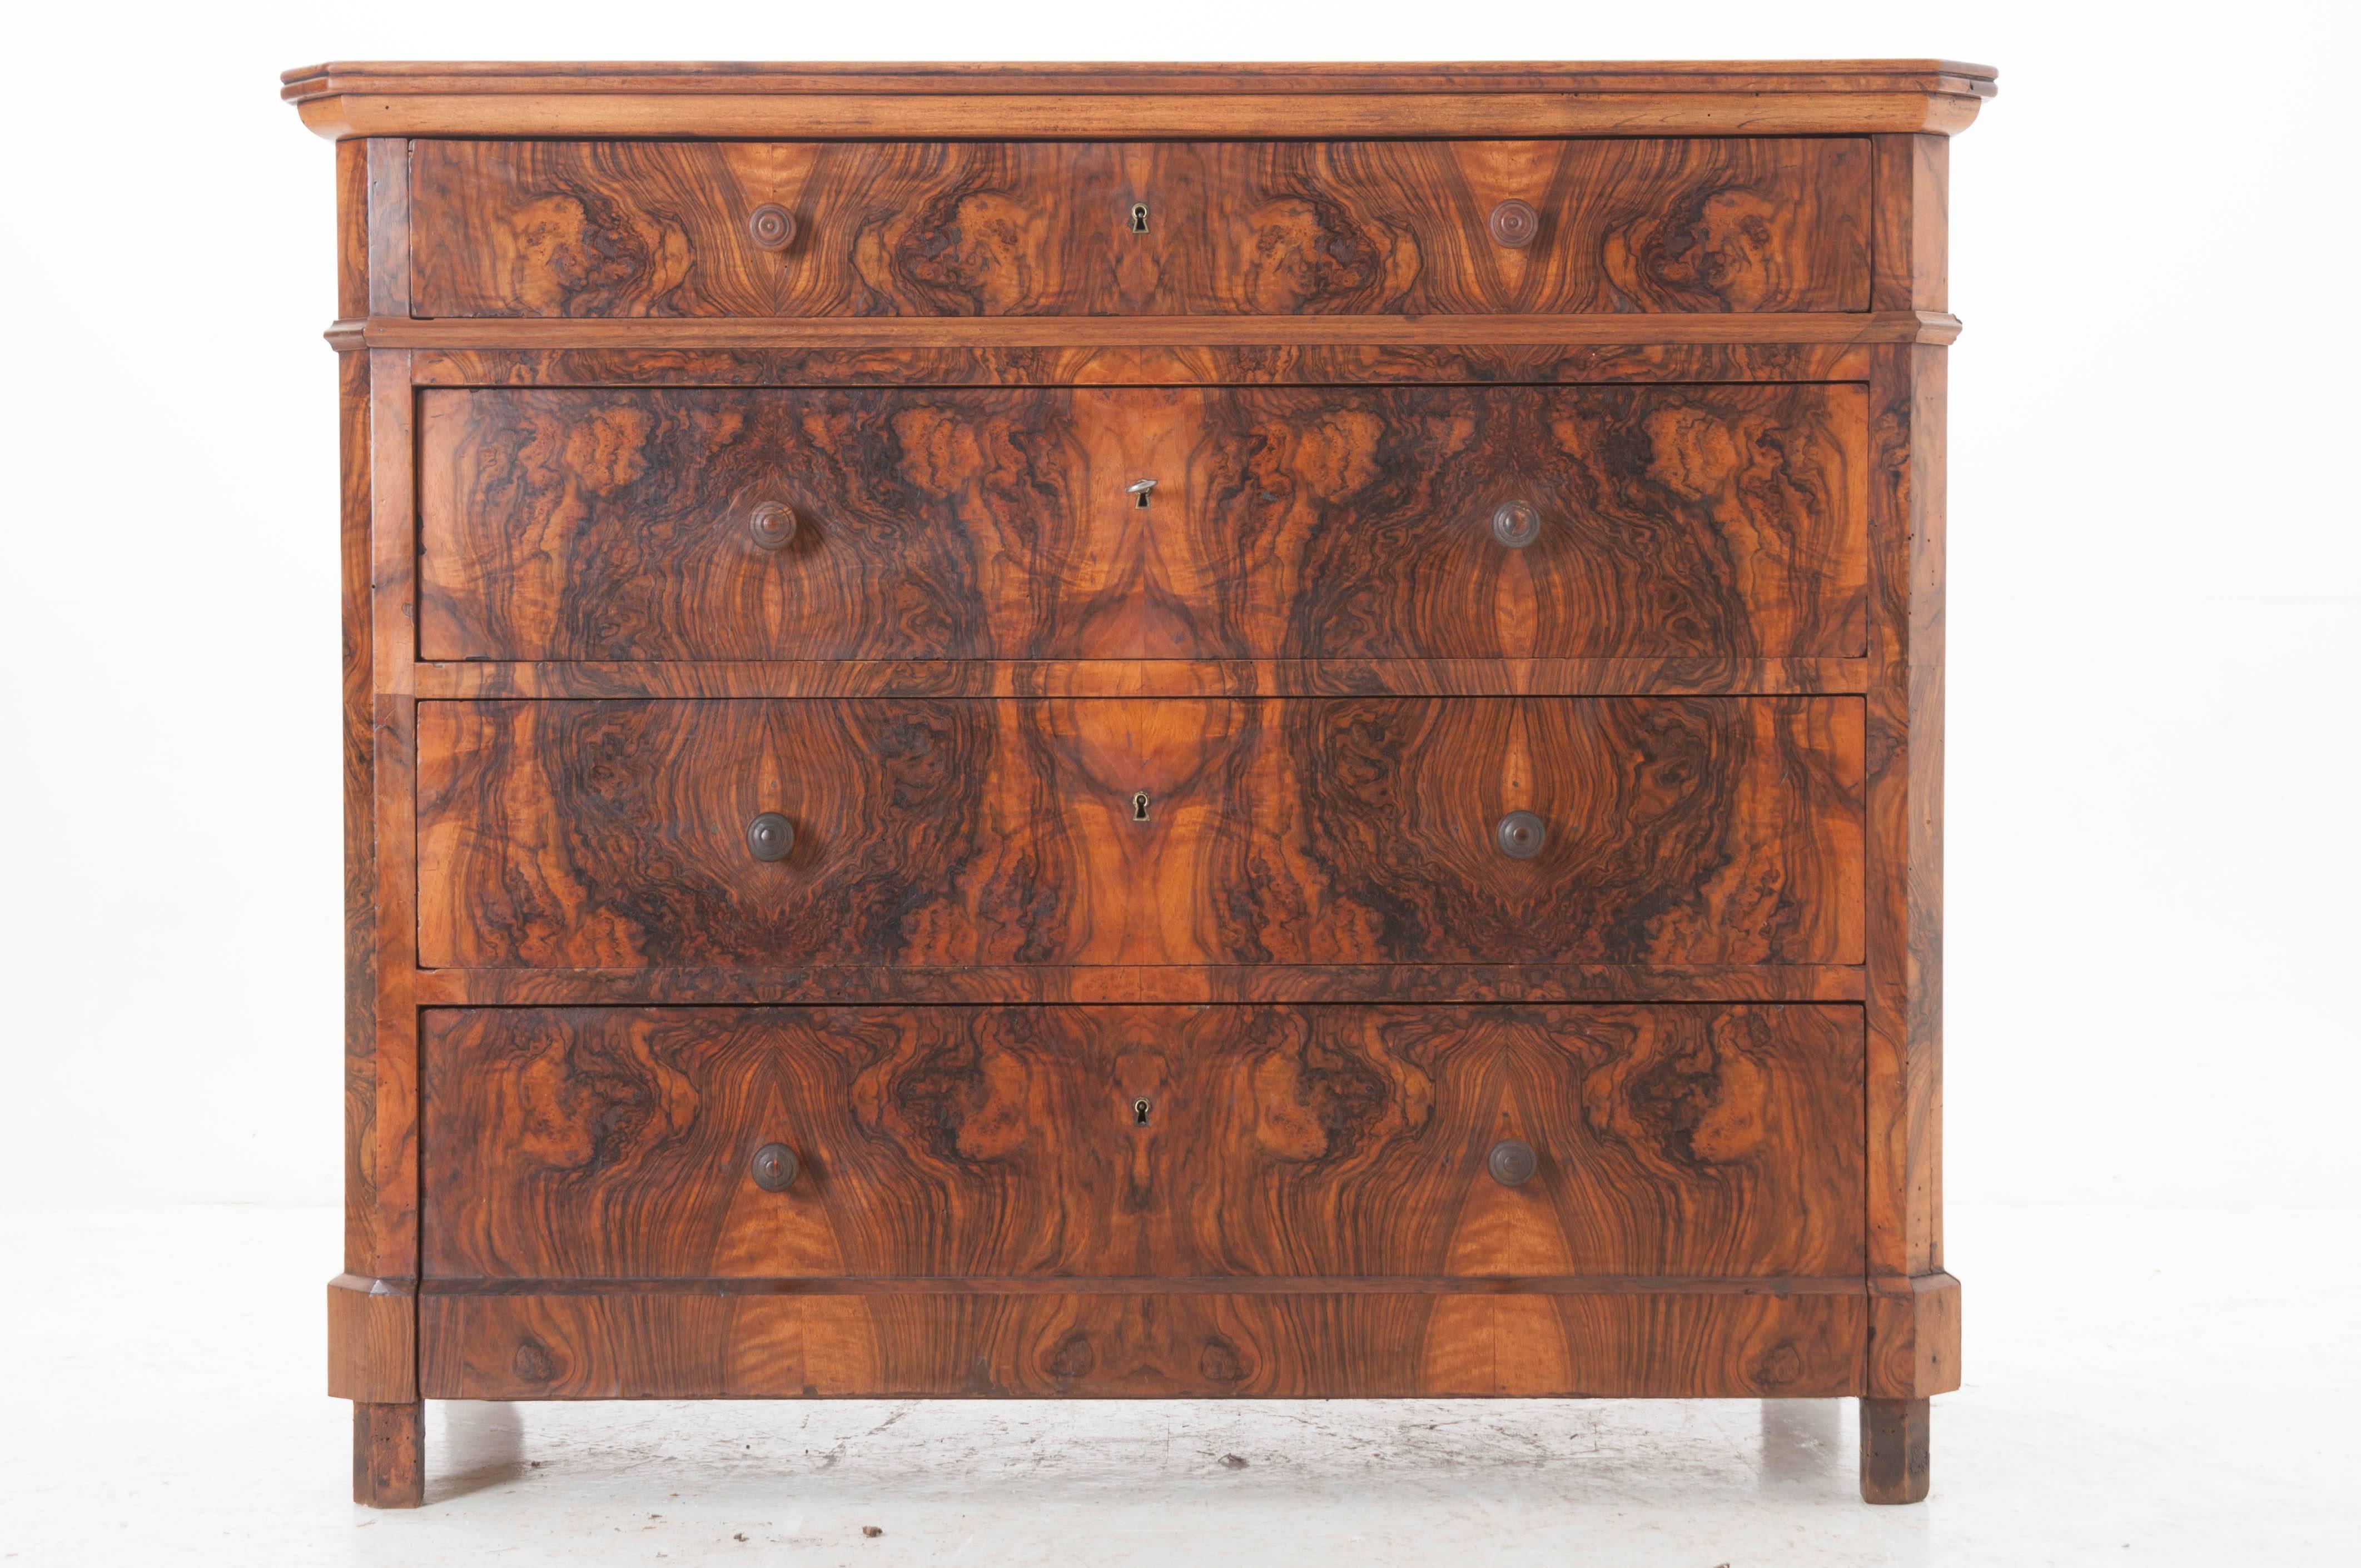 This four-drawer Louis Philippe commode features some of the most beautifully burl walnut that we have seen. Thoughtfully book matched; the furniture maker carefully selected each piece so the patterns in the burl align to give a mirrored effect.